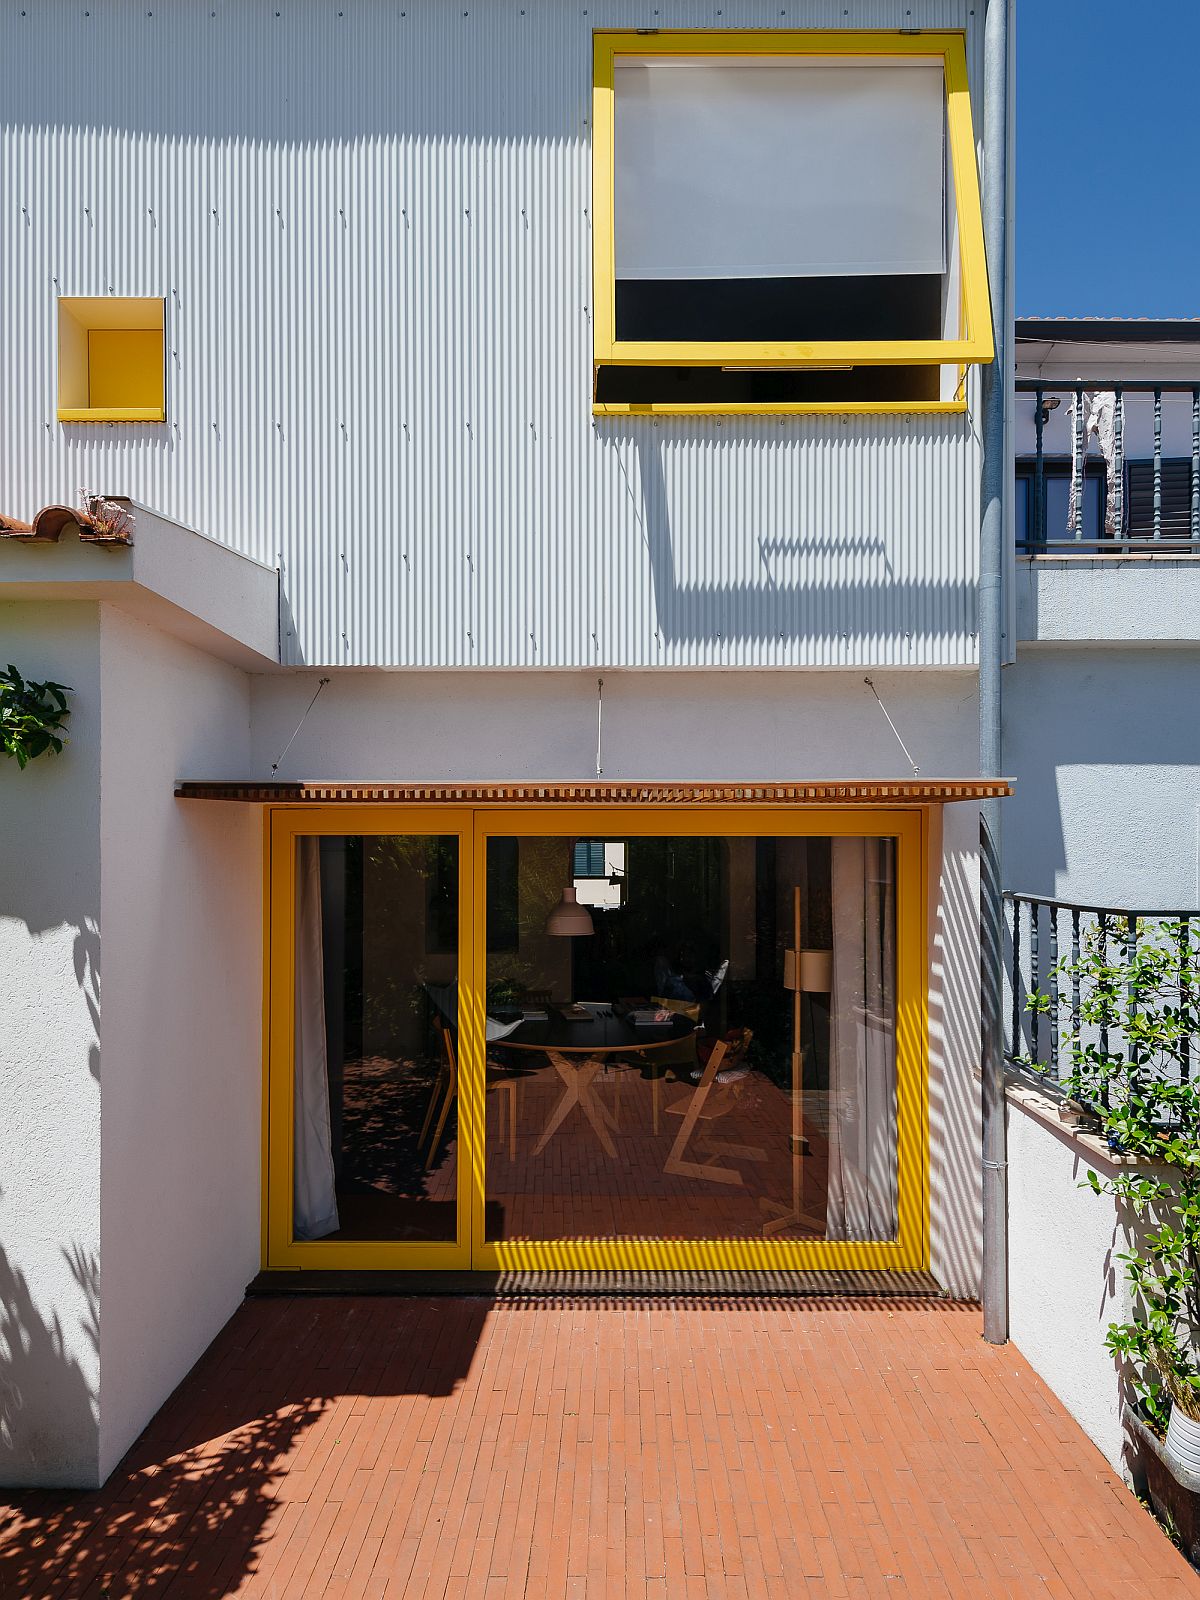 Backyard of the house is connected with the interior using sliding glass doors that have a bright yellow frame